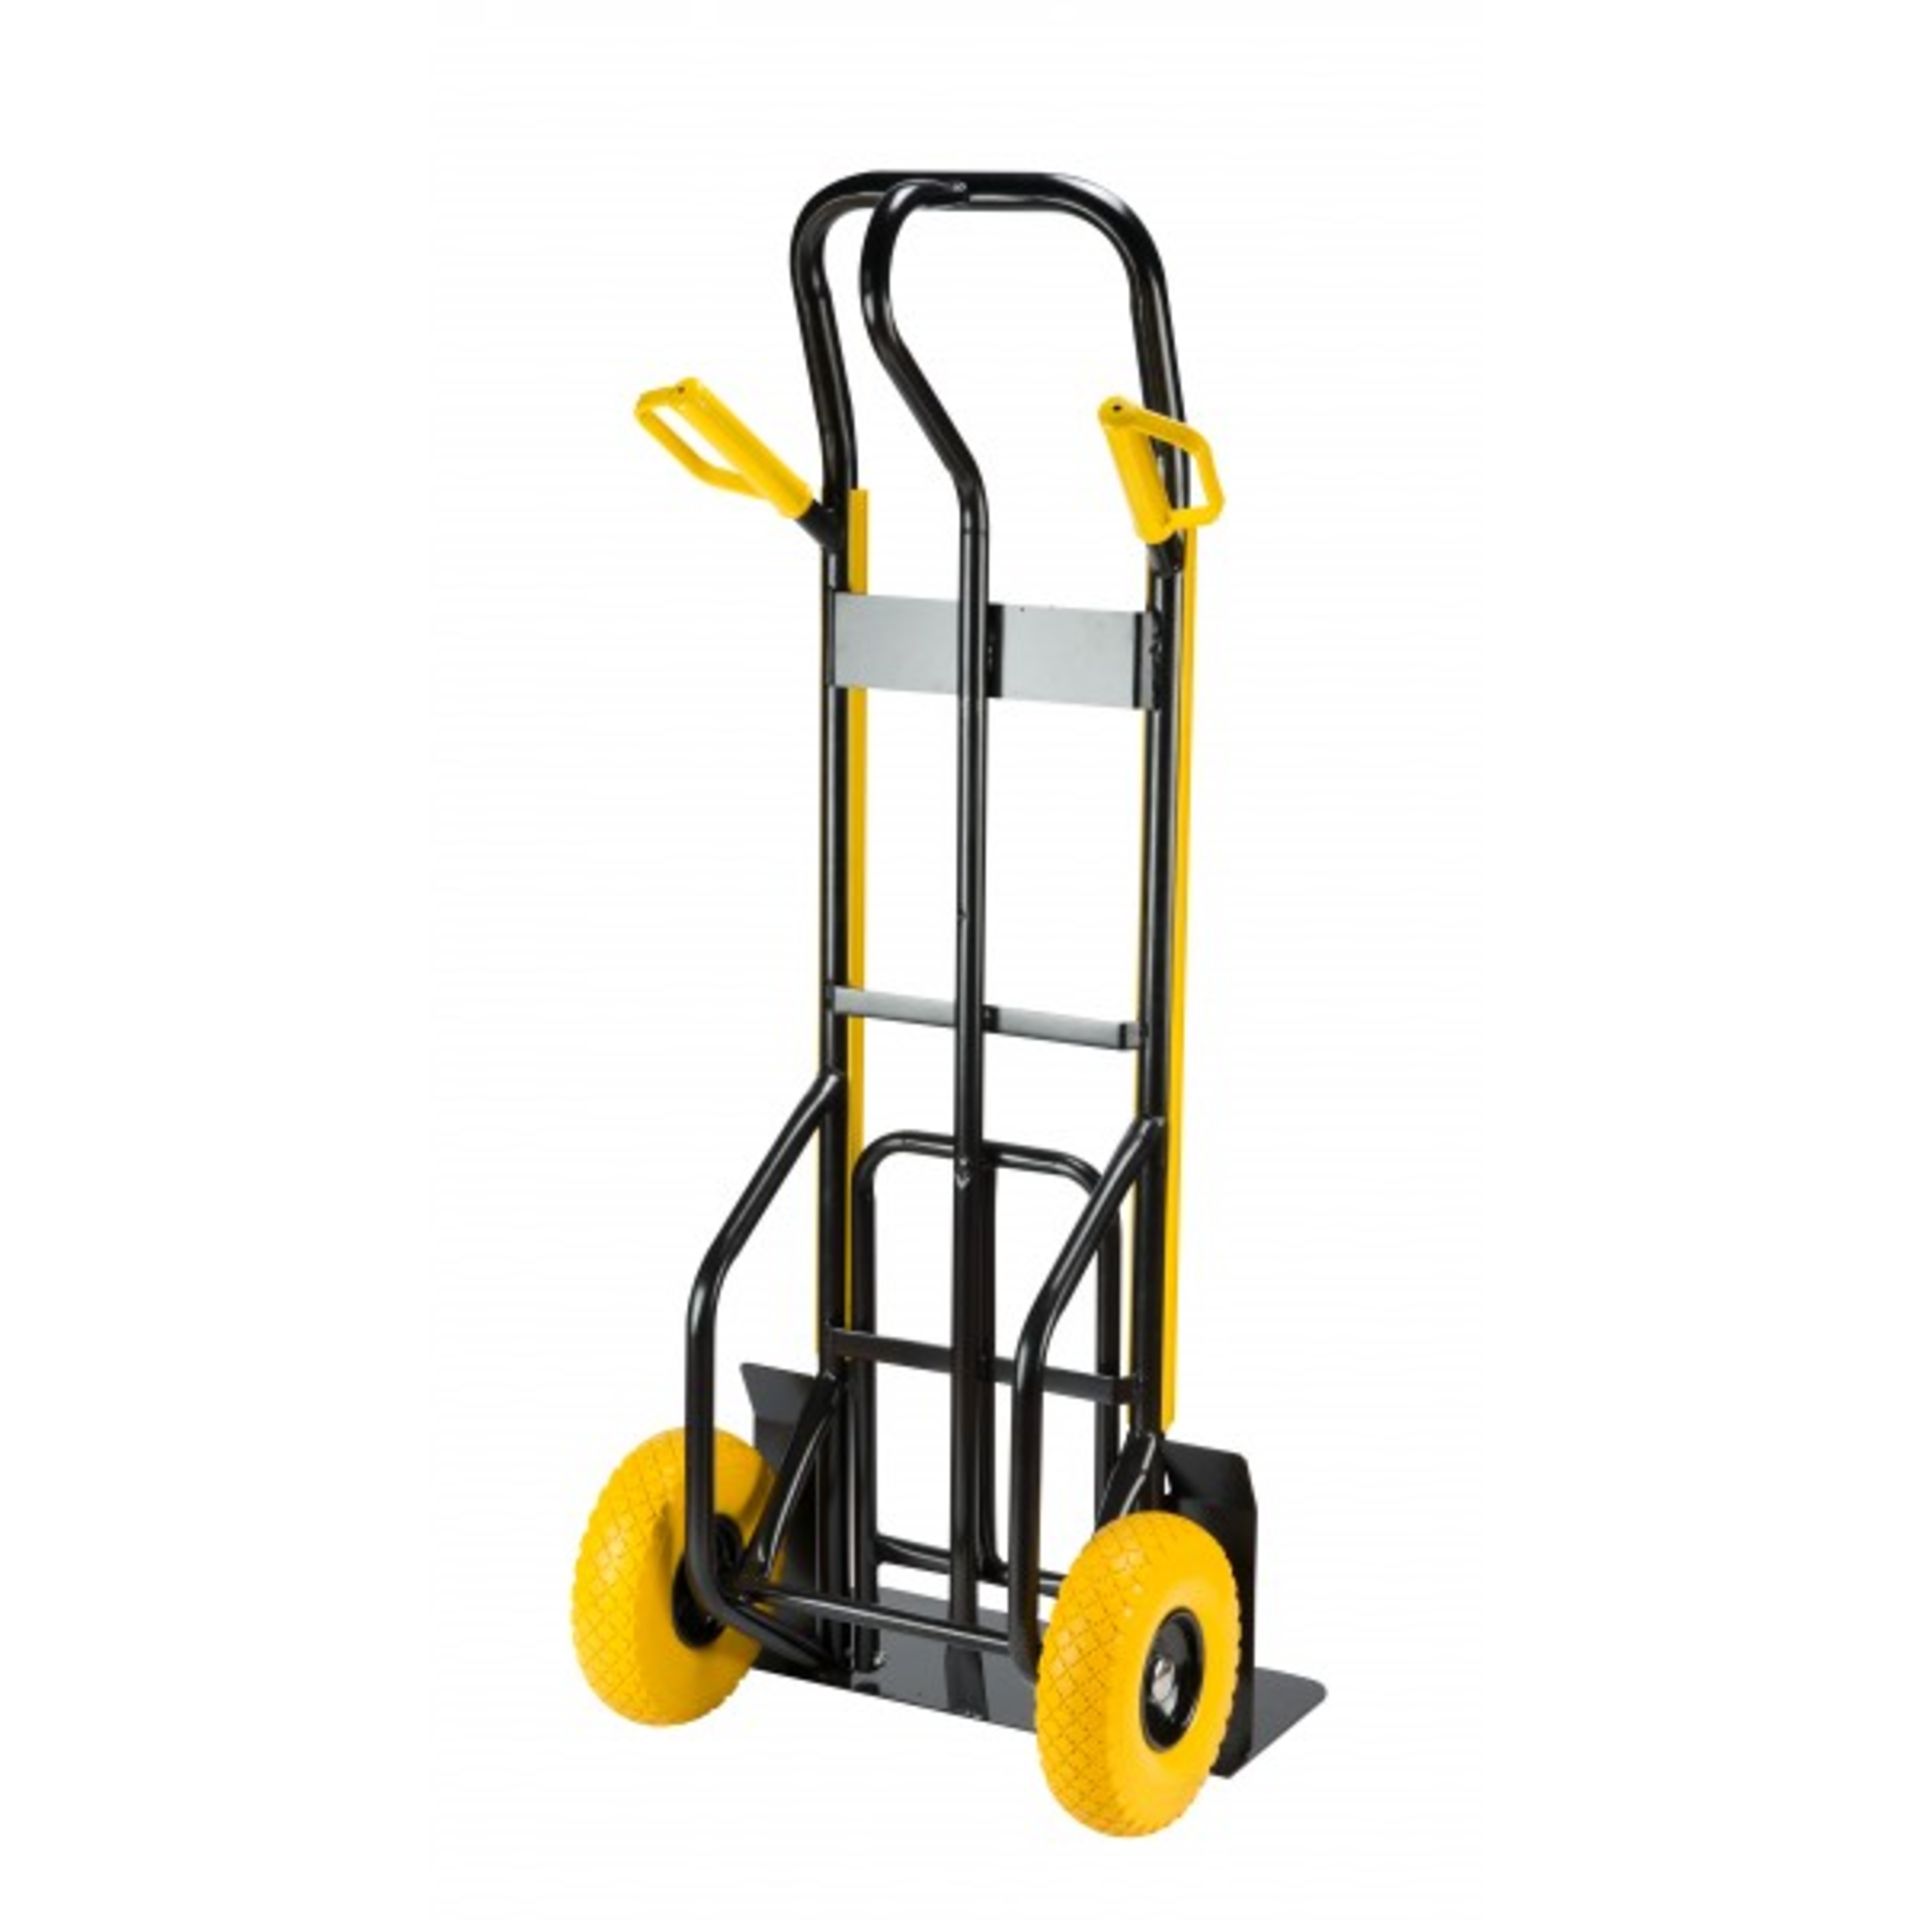 Brand New 250kg STANLEY FATMAX All-round Hand Truck, All-in-one design: P-Handle let’s truck lay - Image 2 of 3